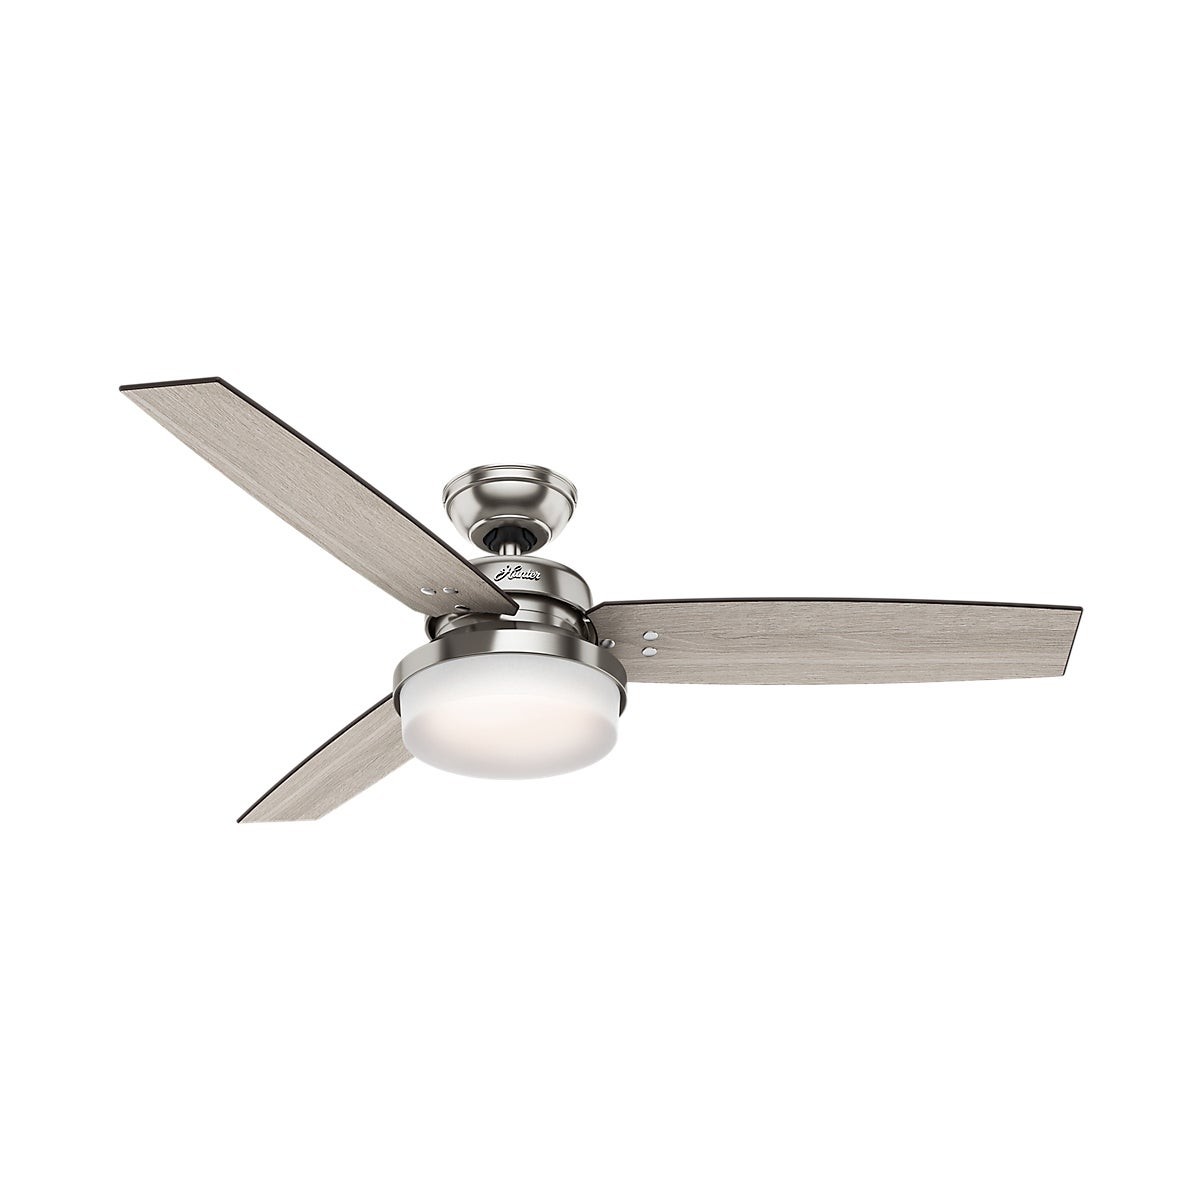 Contemporary Sentinel 52" Ceiling Fan Brushed Nickel Finish